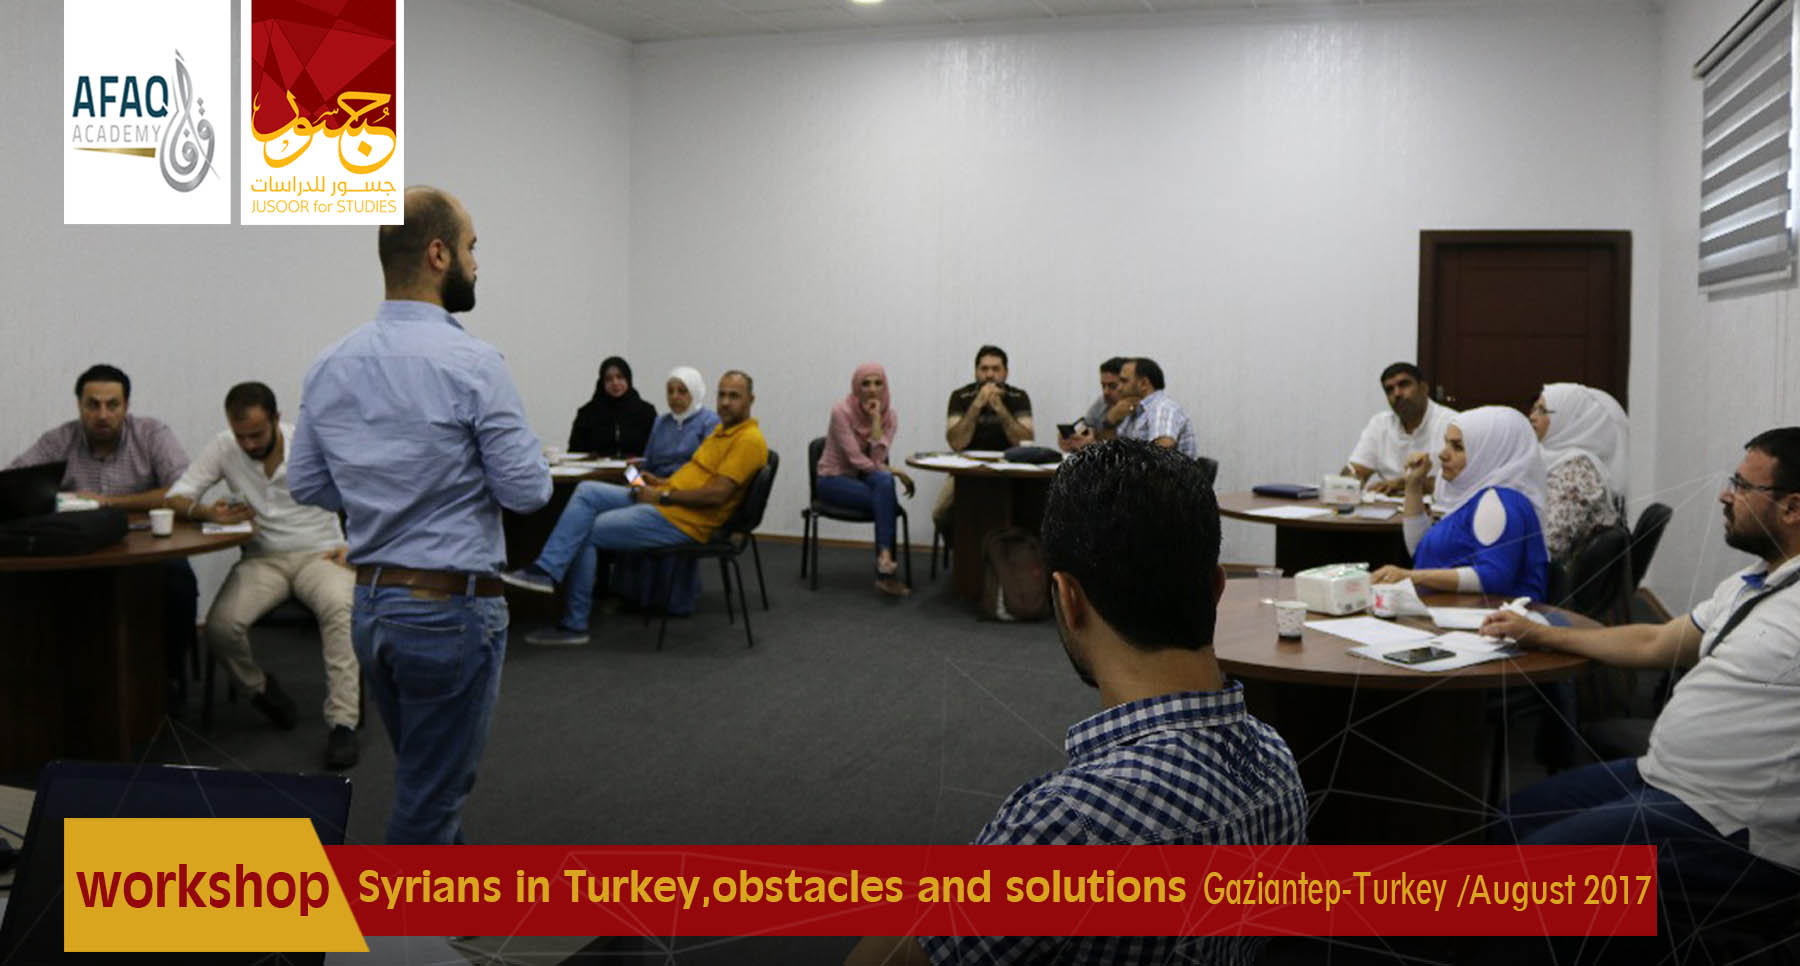 Syrians in Turkey: obstacles and solutions